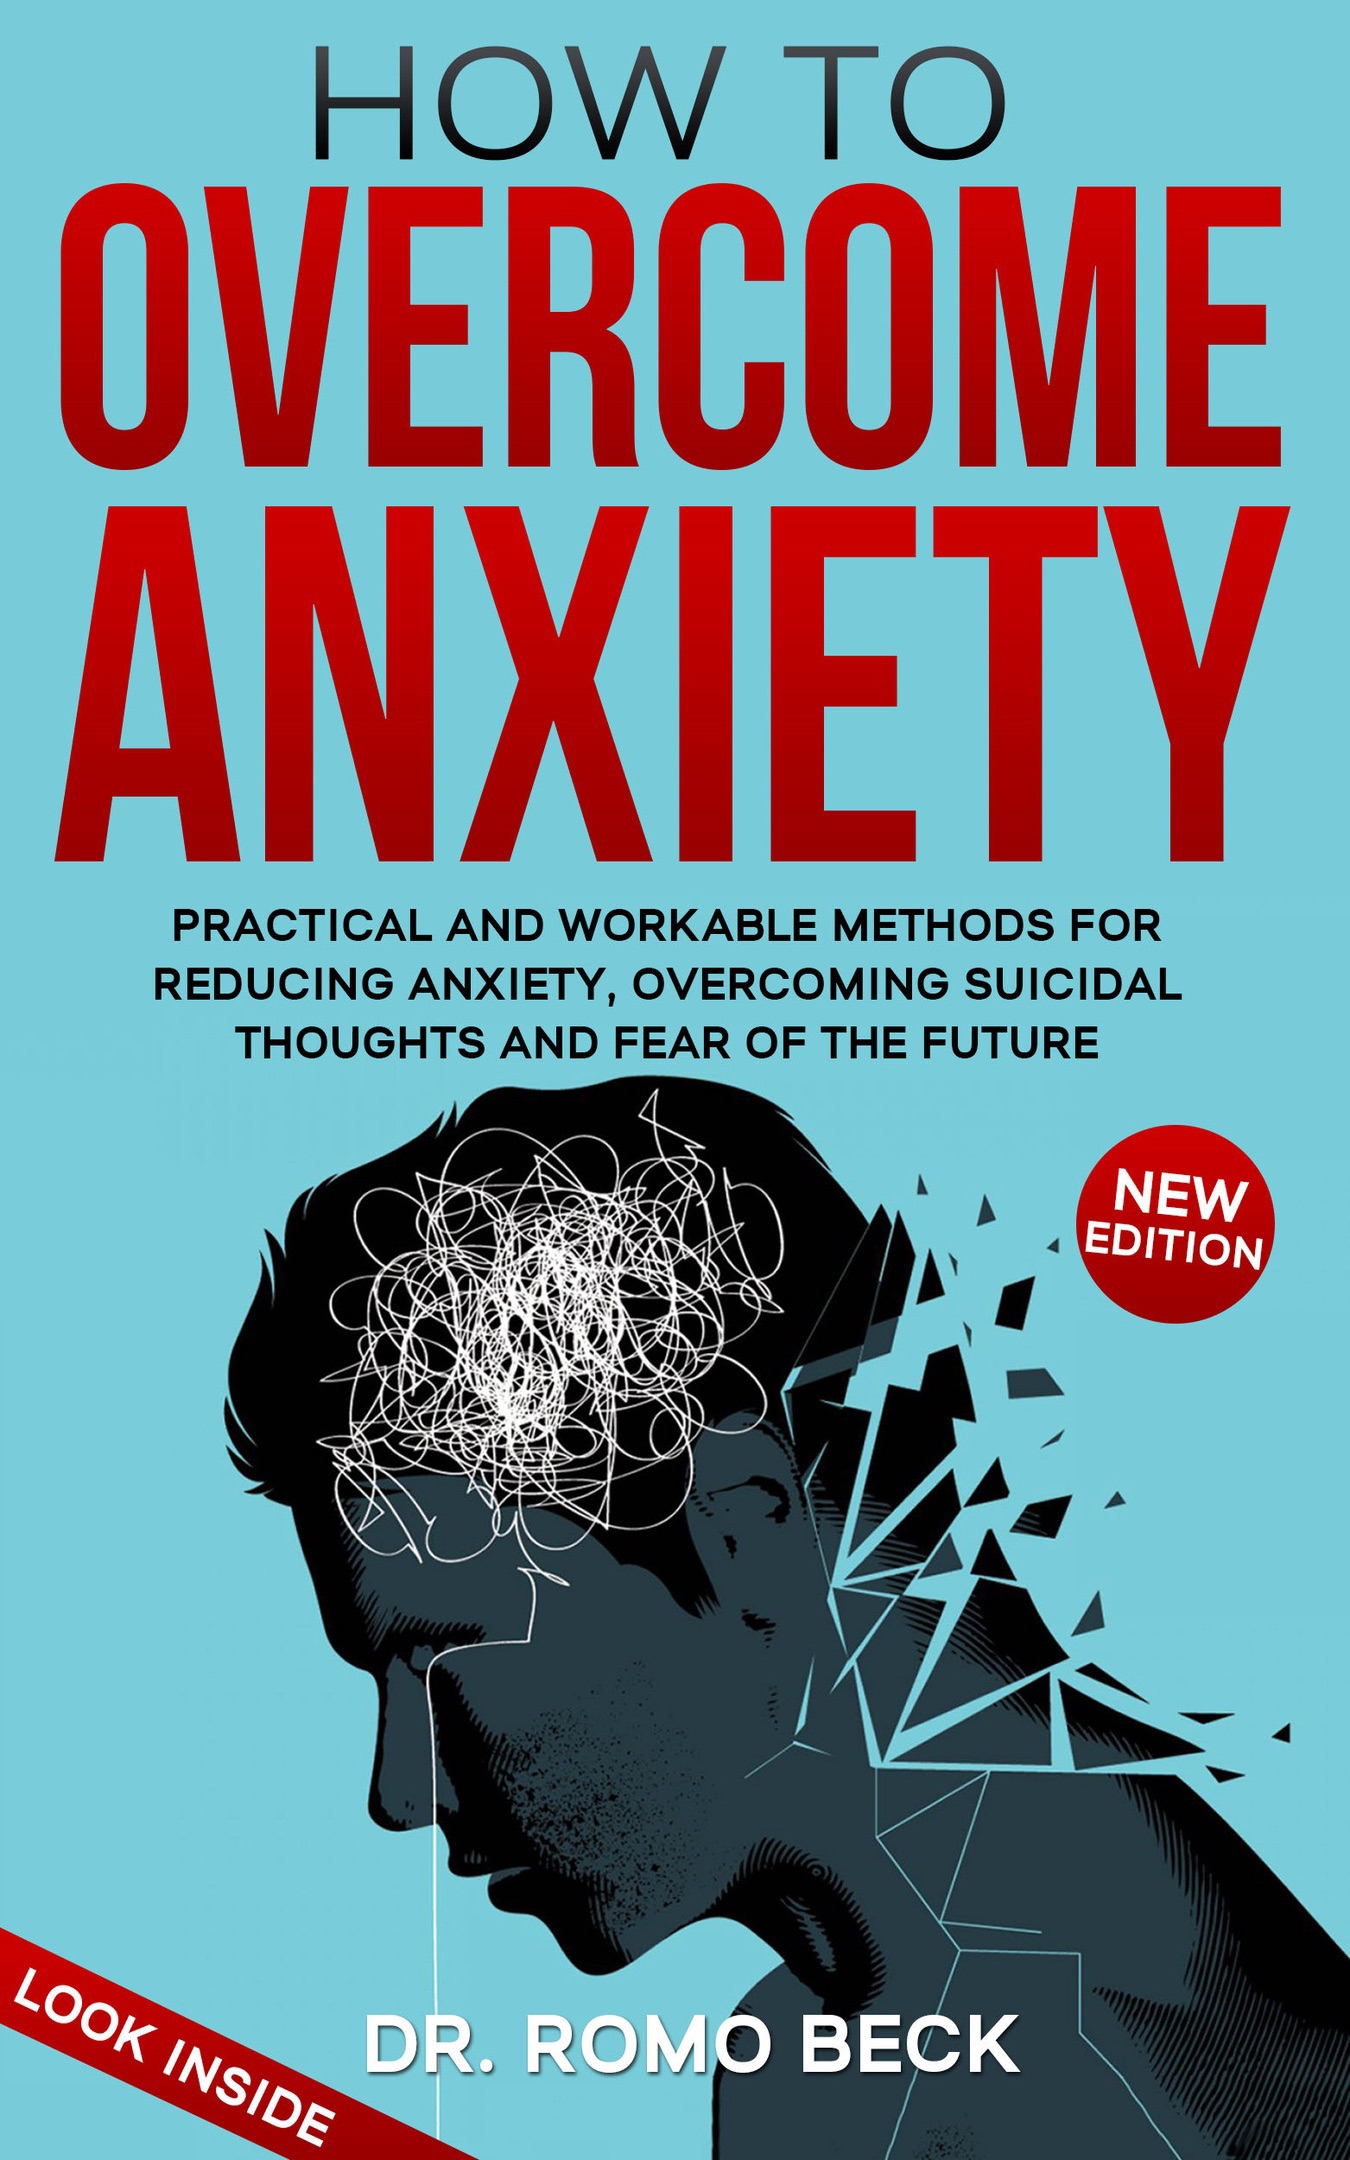 FREE: How to Overcome Anxiety. Practical and Workable Methods for Reducing Anxiety, Overcoming Suicidal Thoughts and Fear of the Future by Dr. Romo Beck